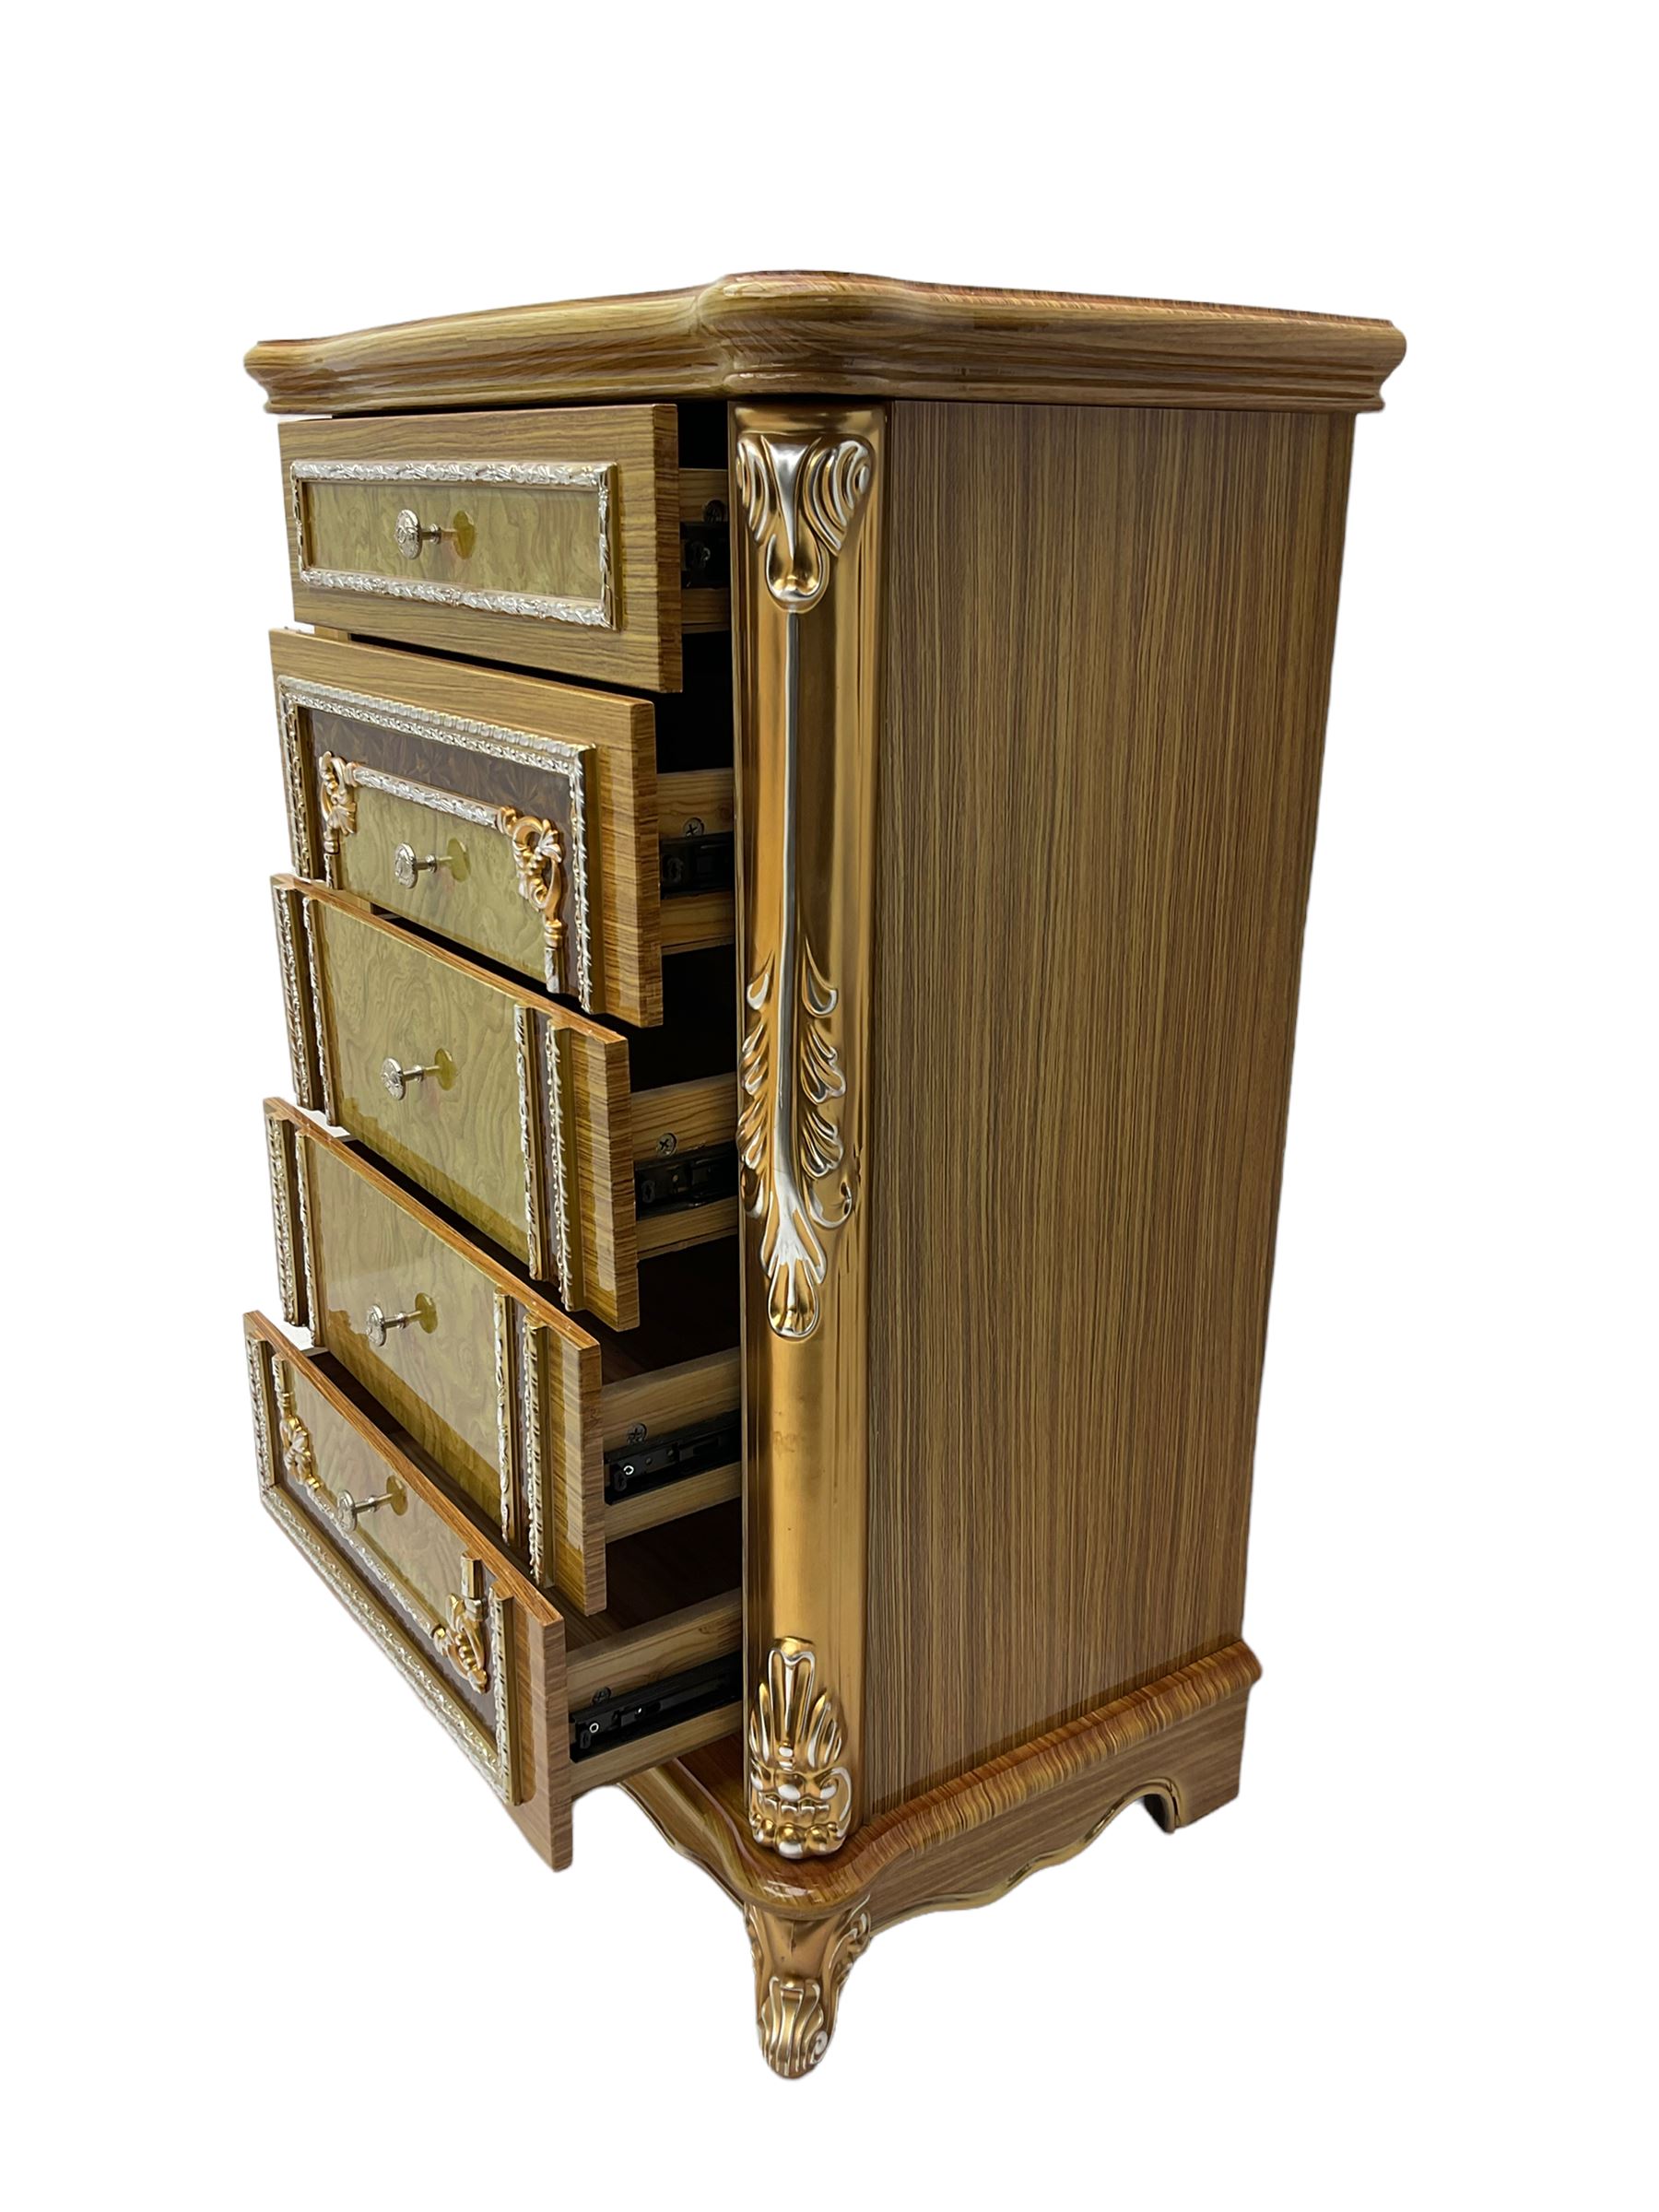 Rococo style wood finish chest - Image 4 of 7